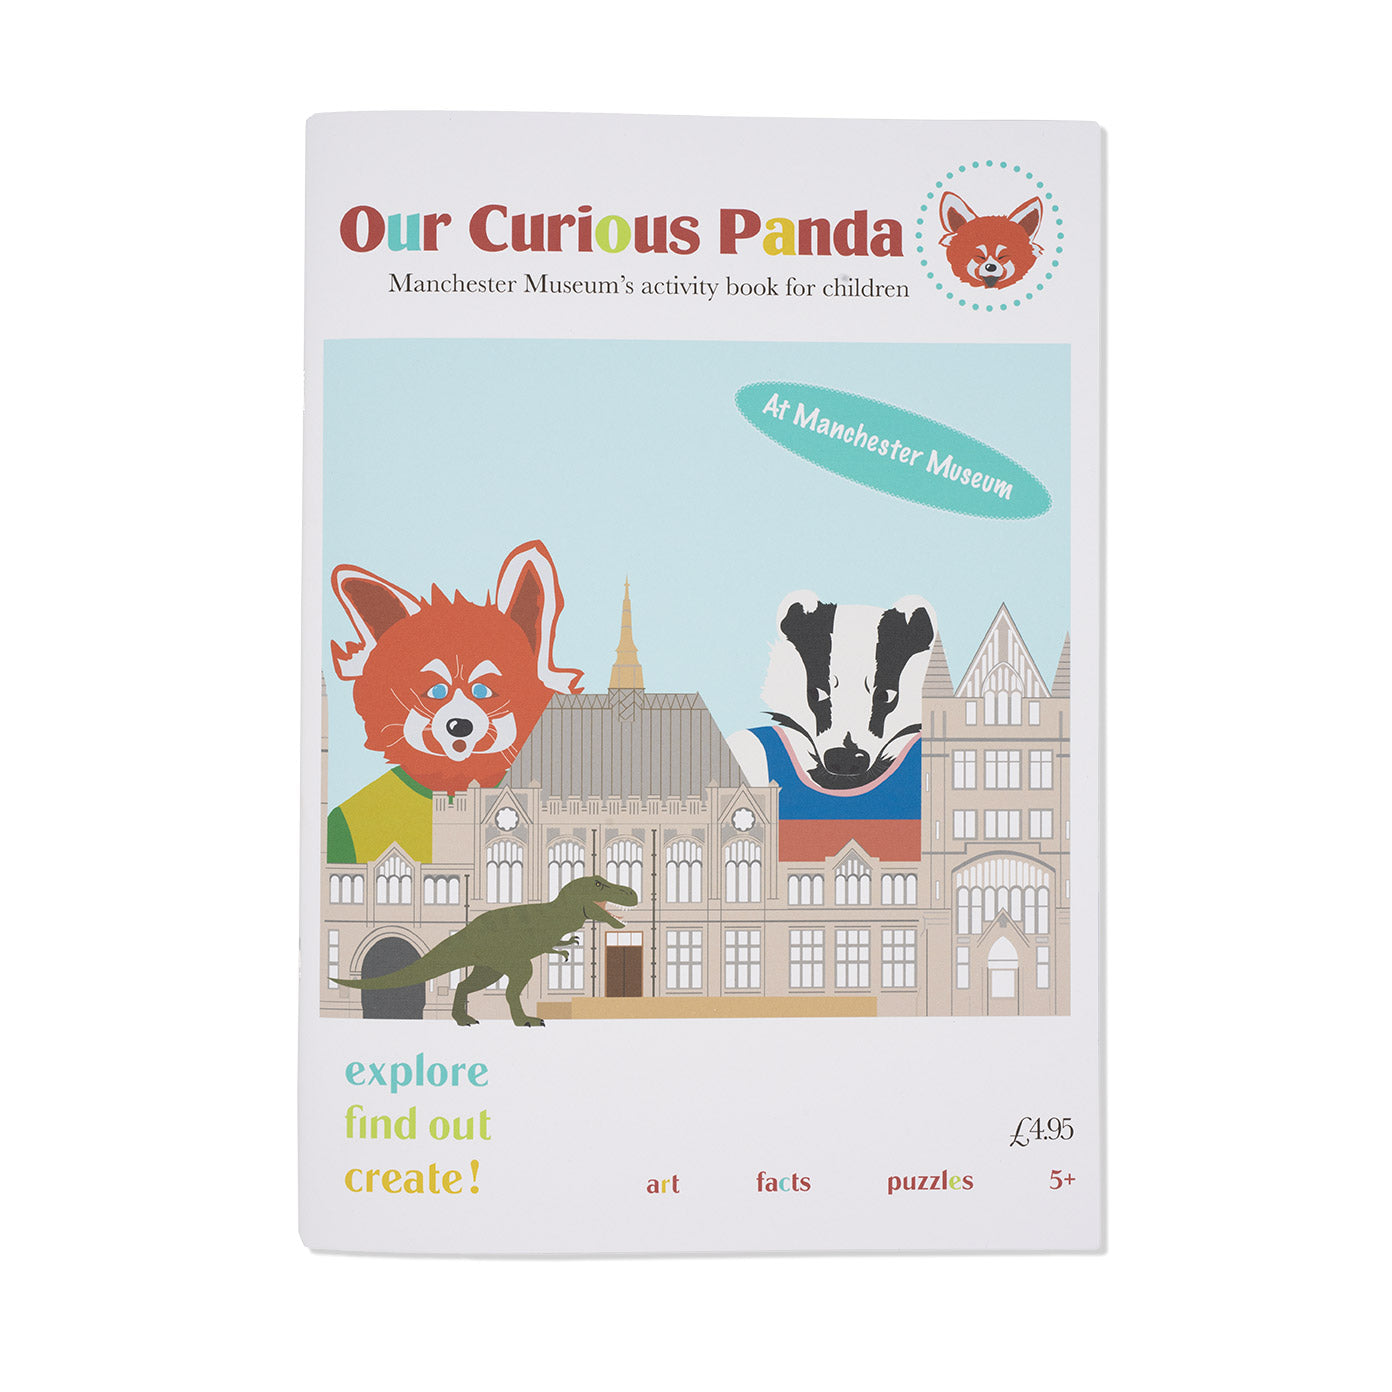 Our Curious Panda magazine cover, featuring an illustration of the Musuem and a badger, fox and dinosaur